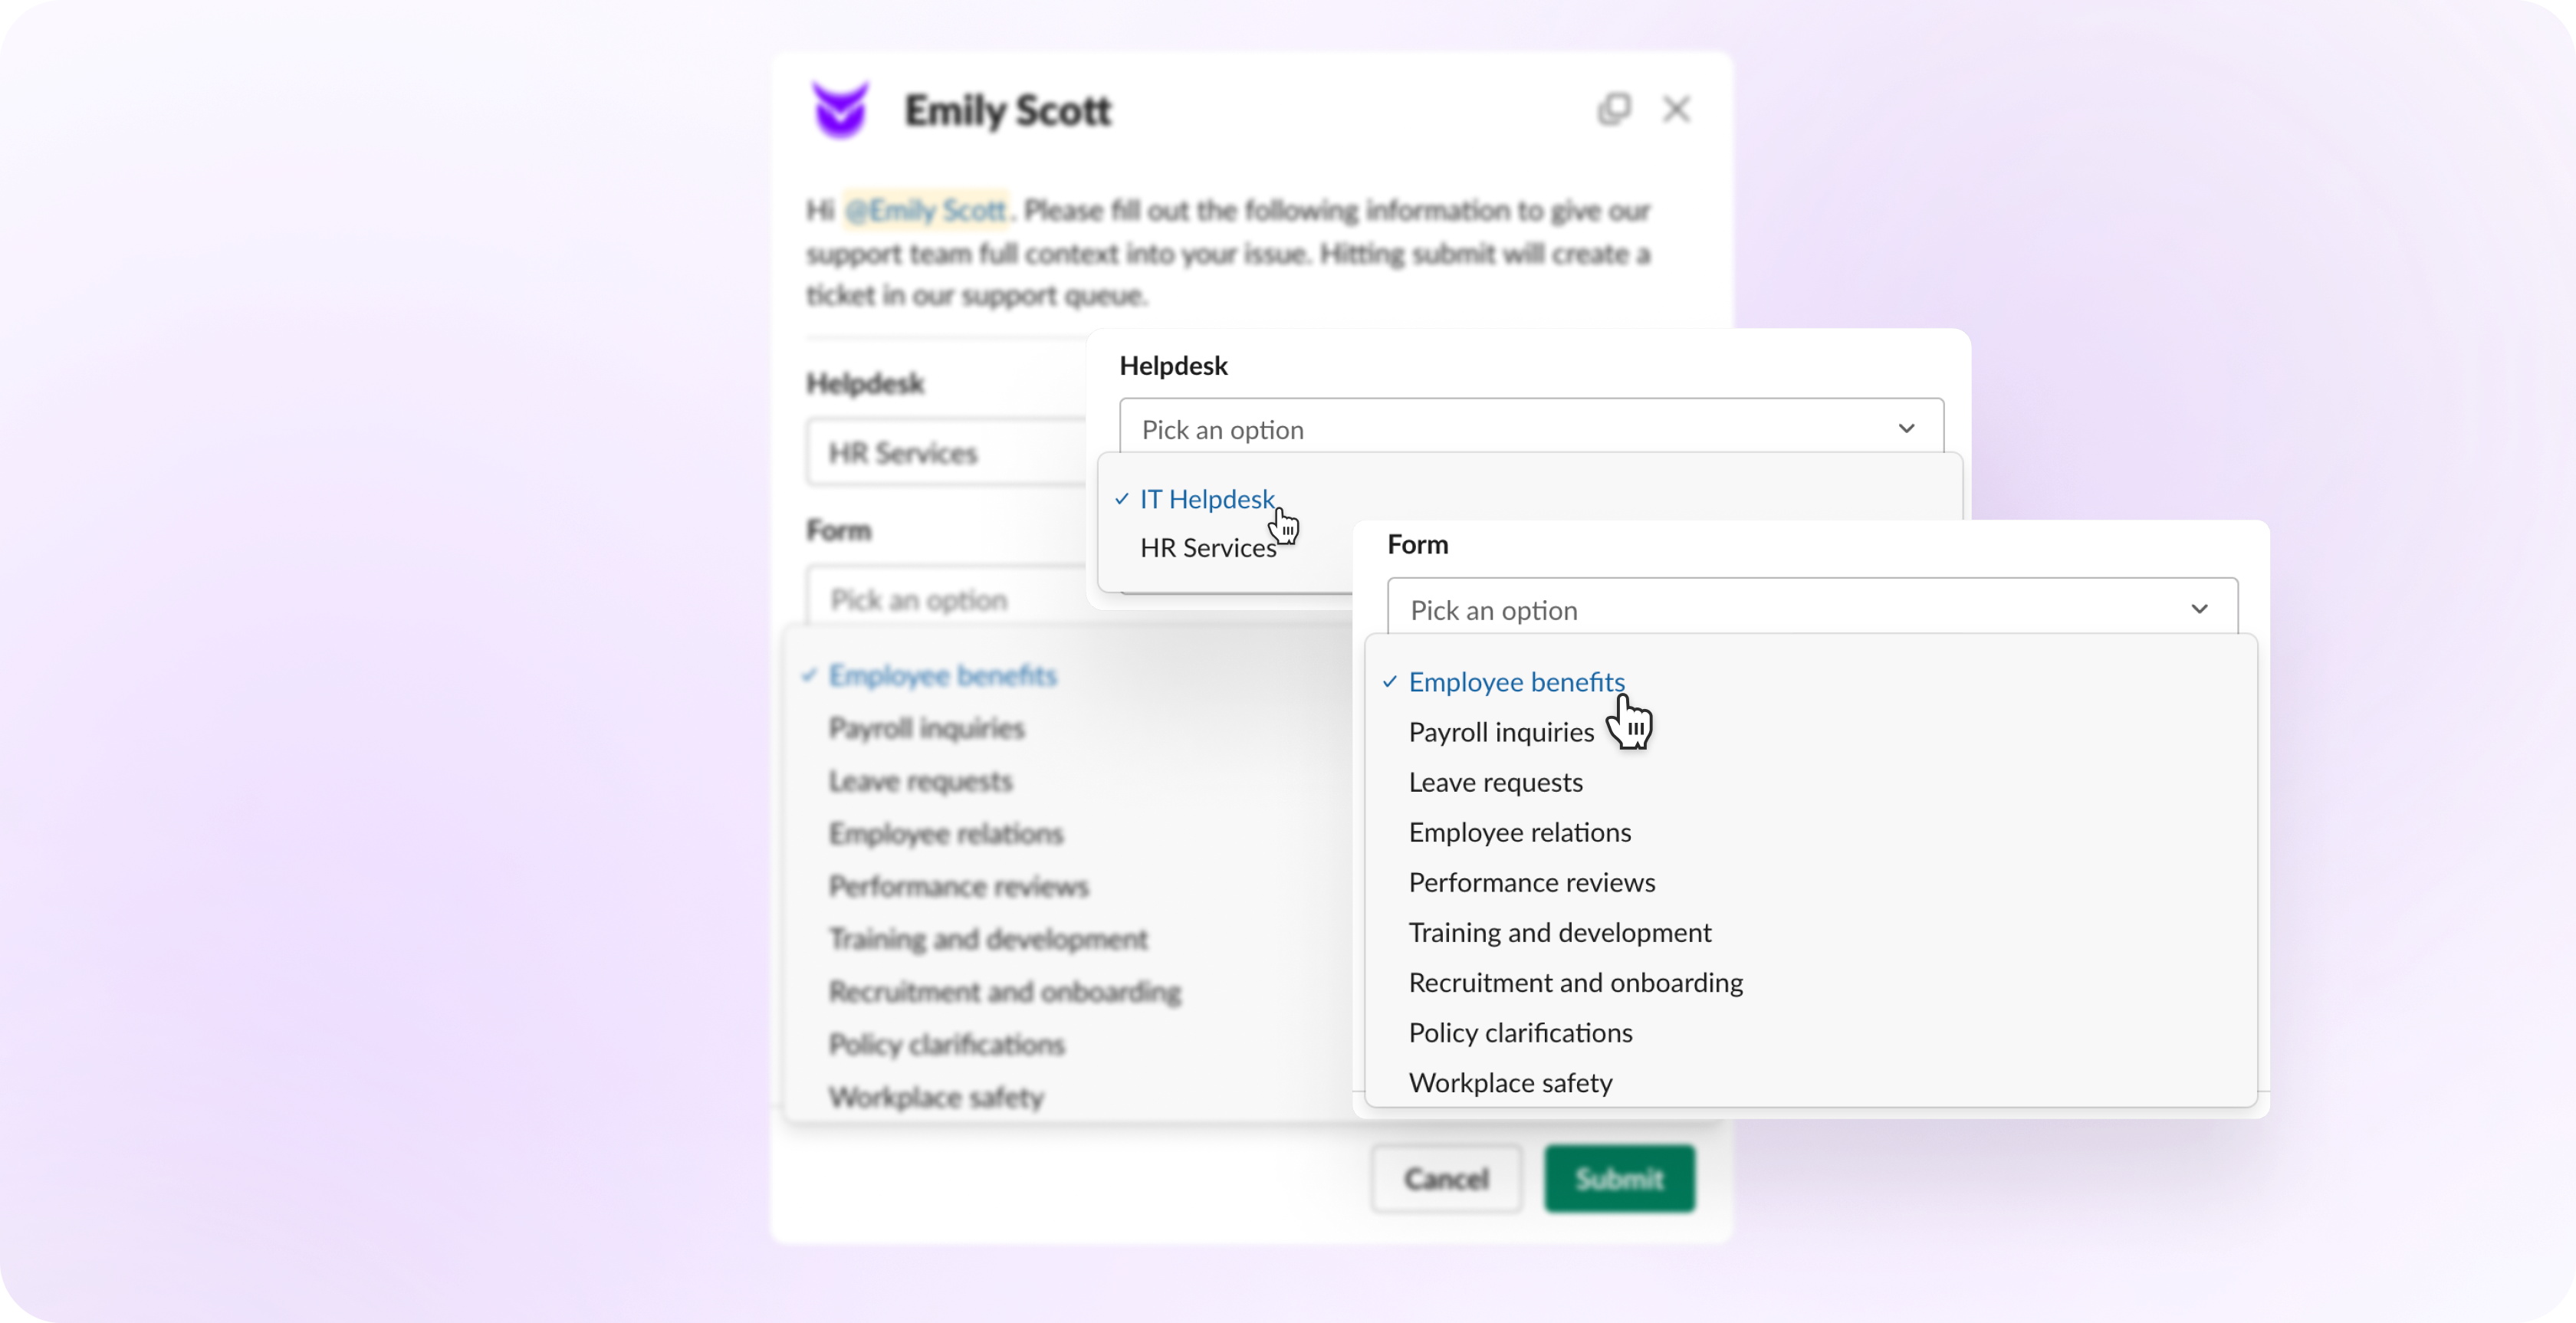 Helpdesk and form selection during ticket creation on Slack